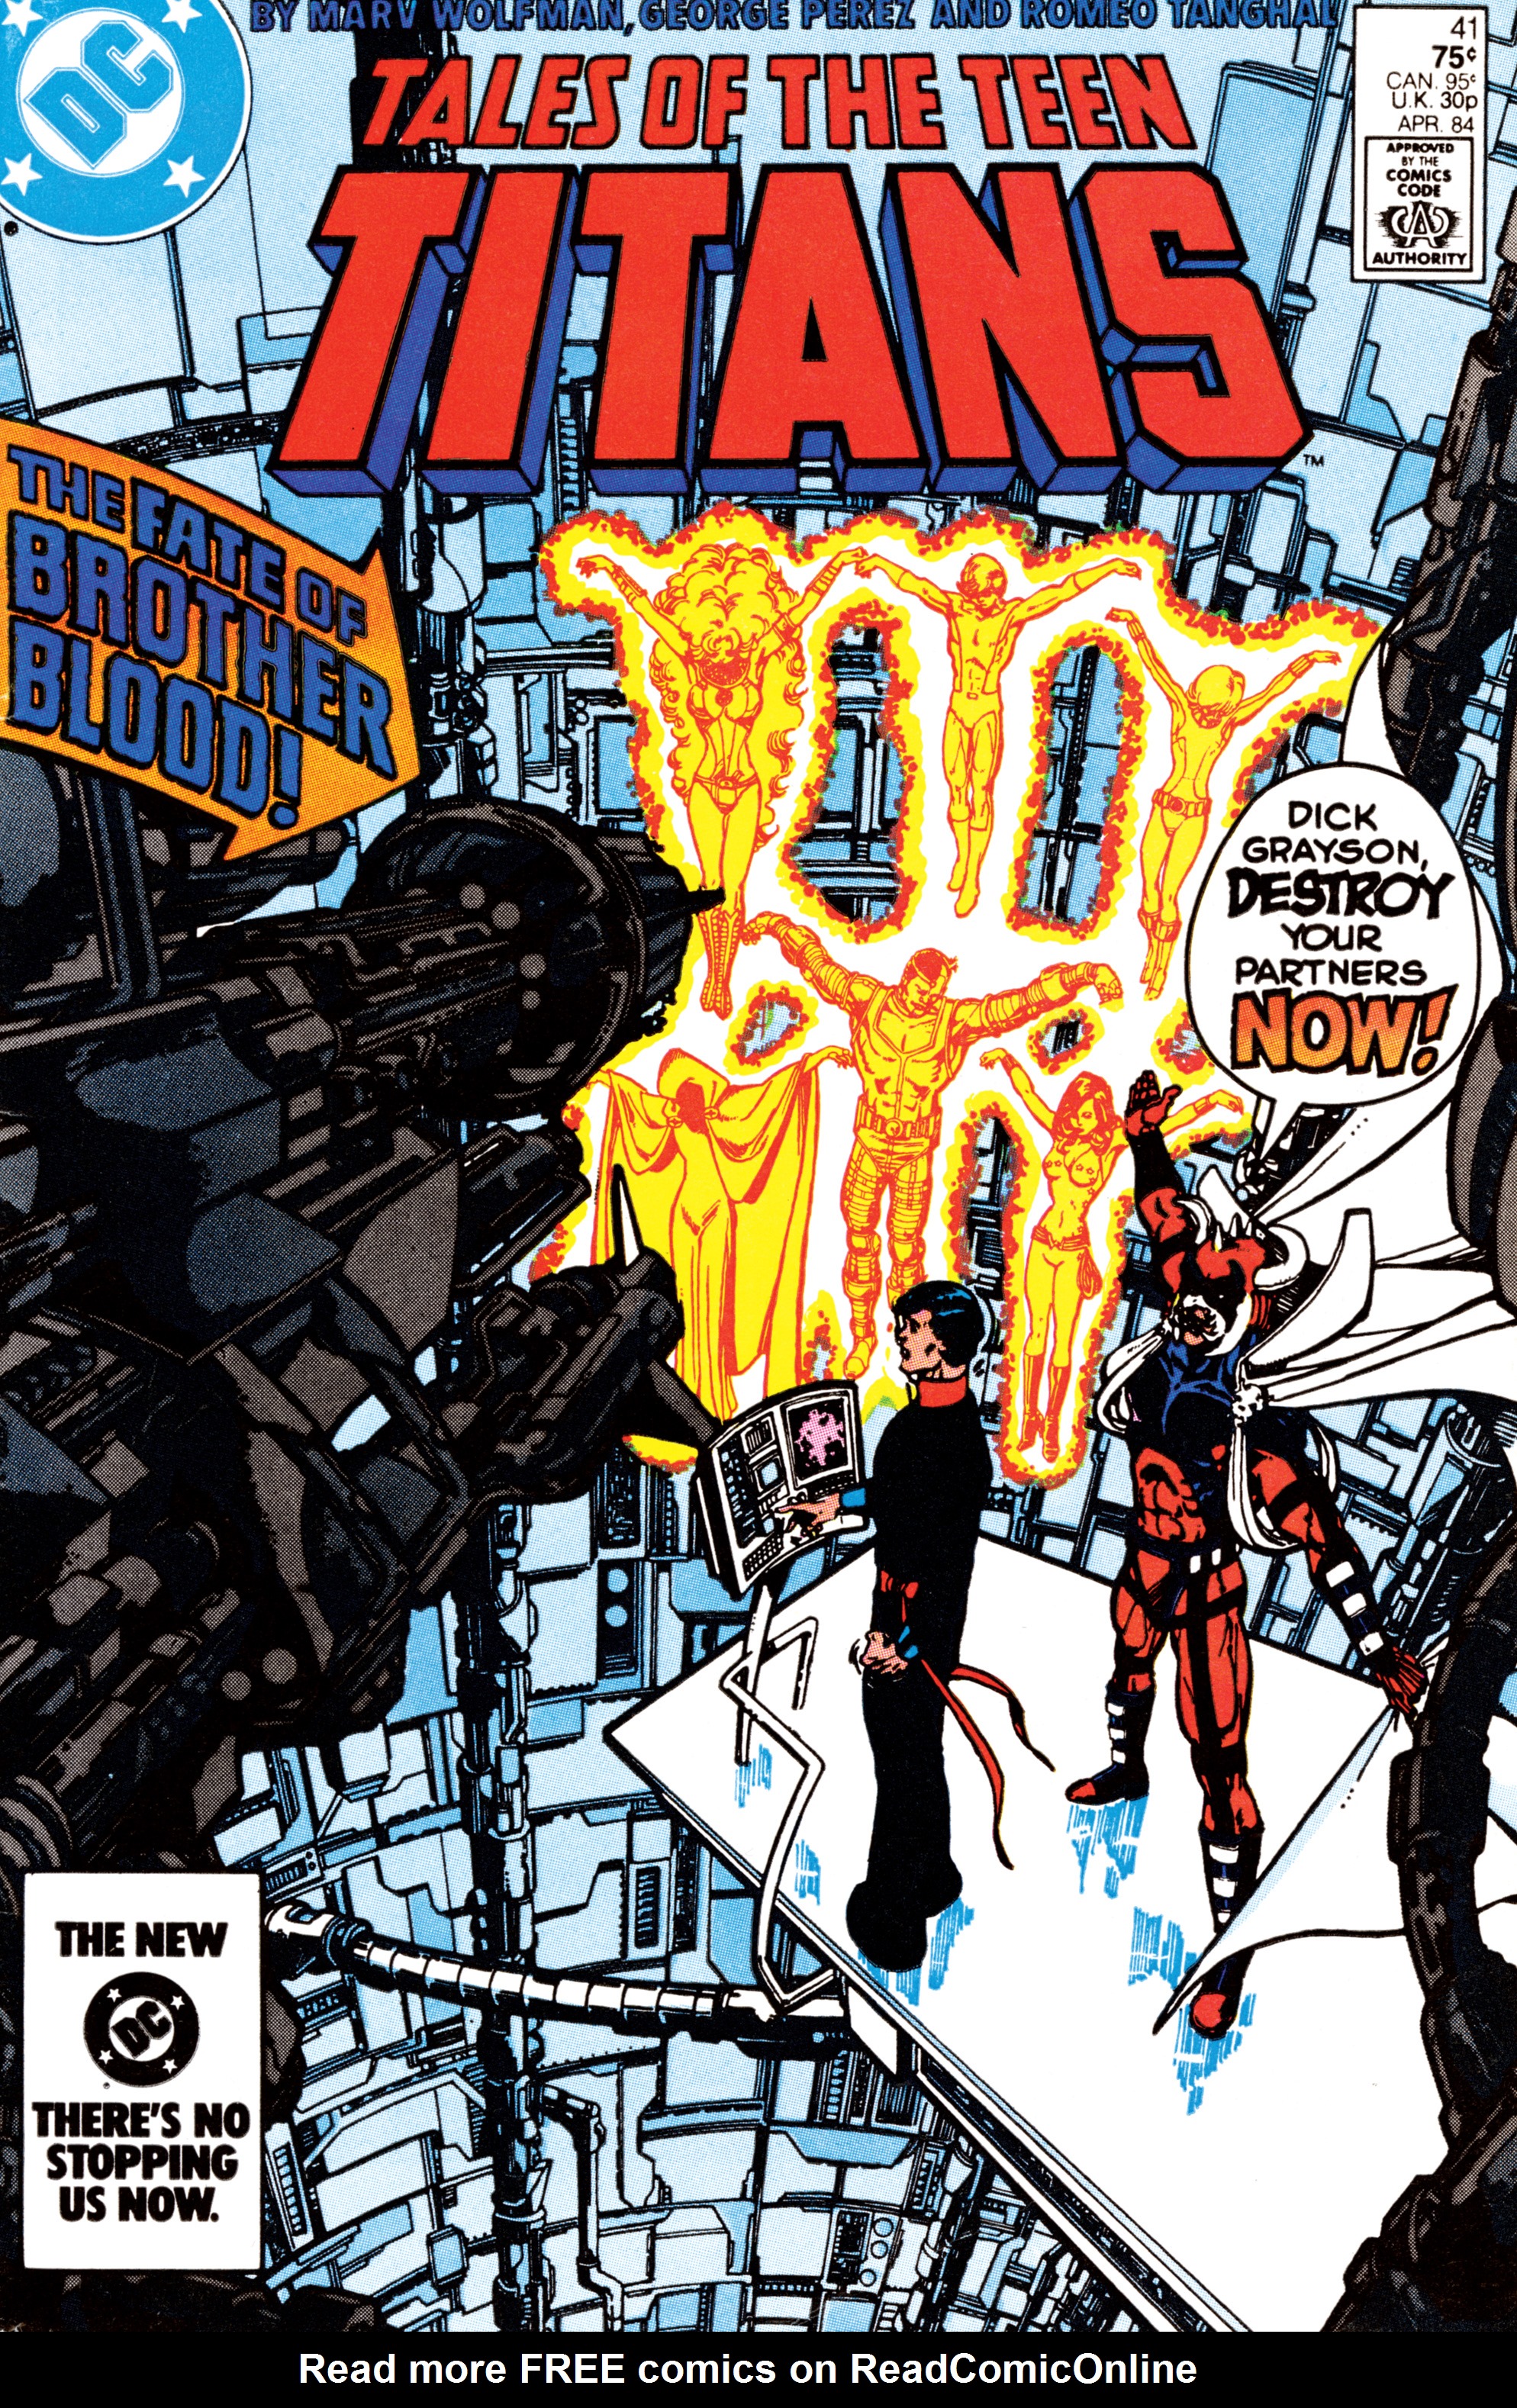 Read online Tales of the Teen Titans comic -  Issue #41 - 1